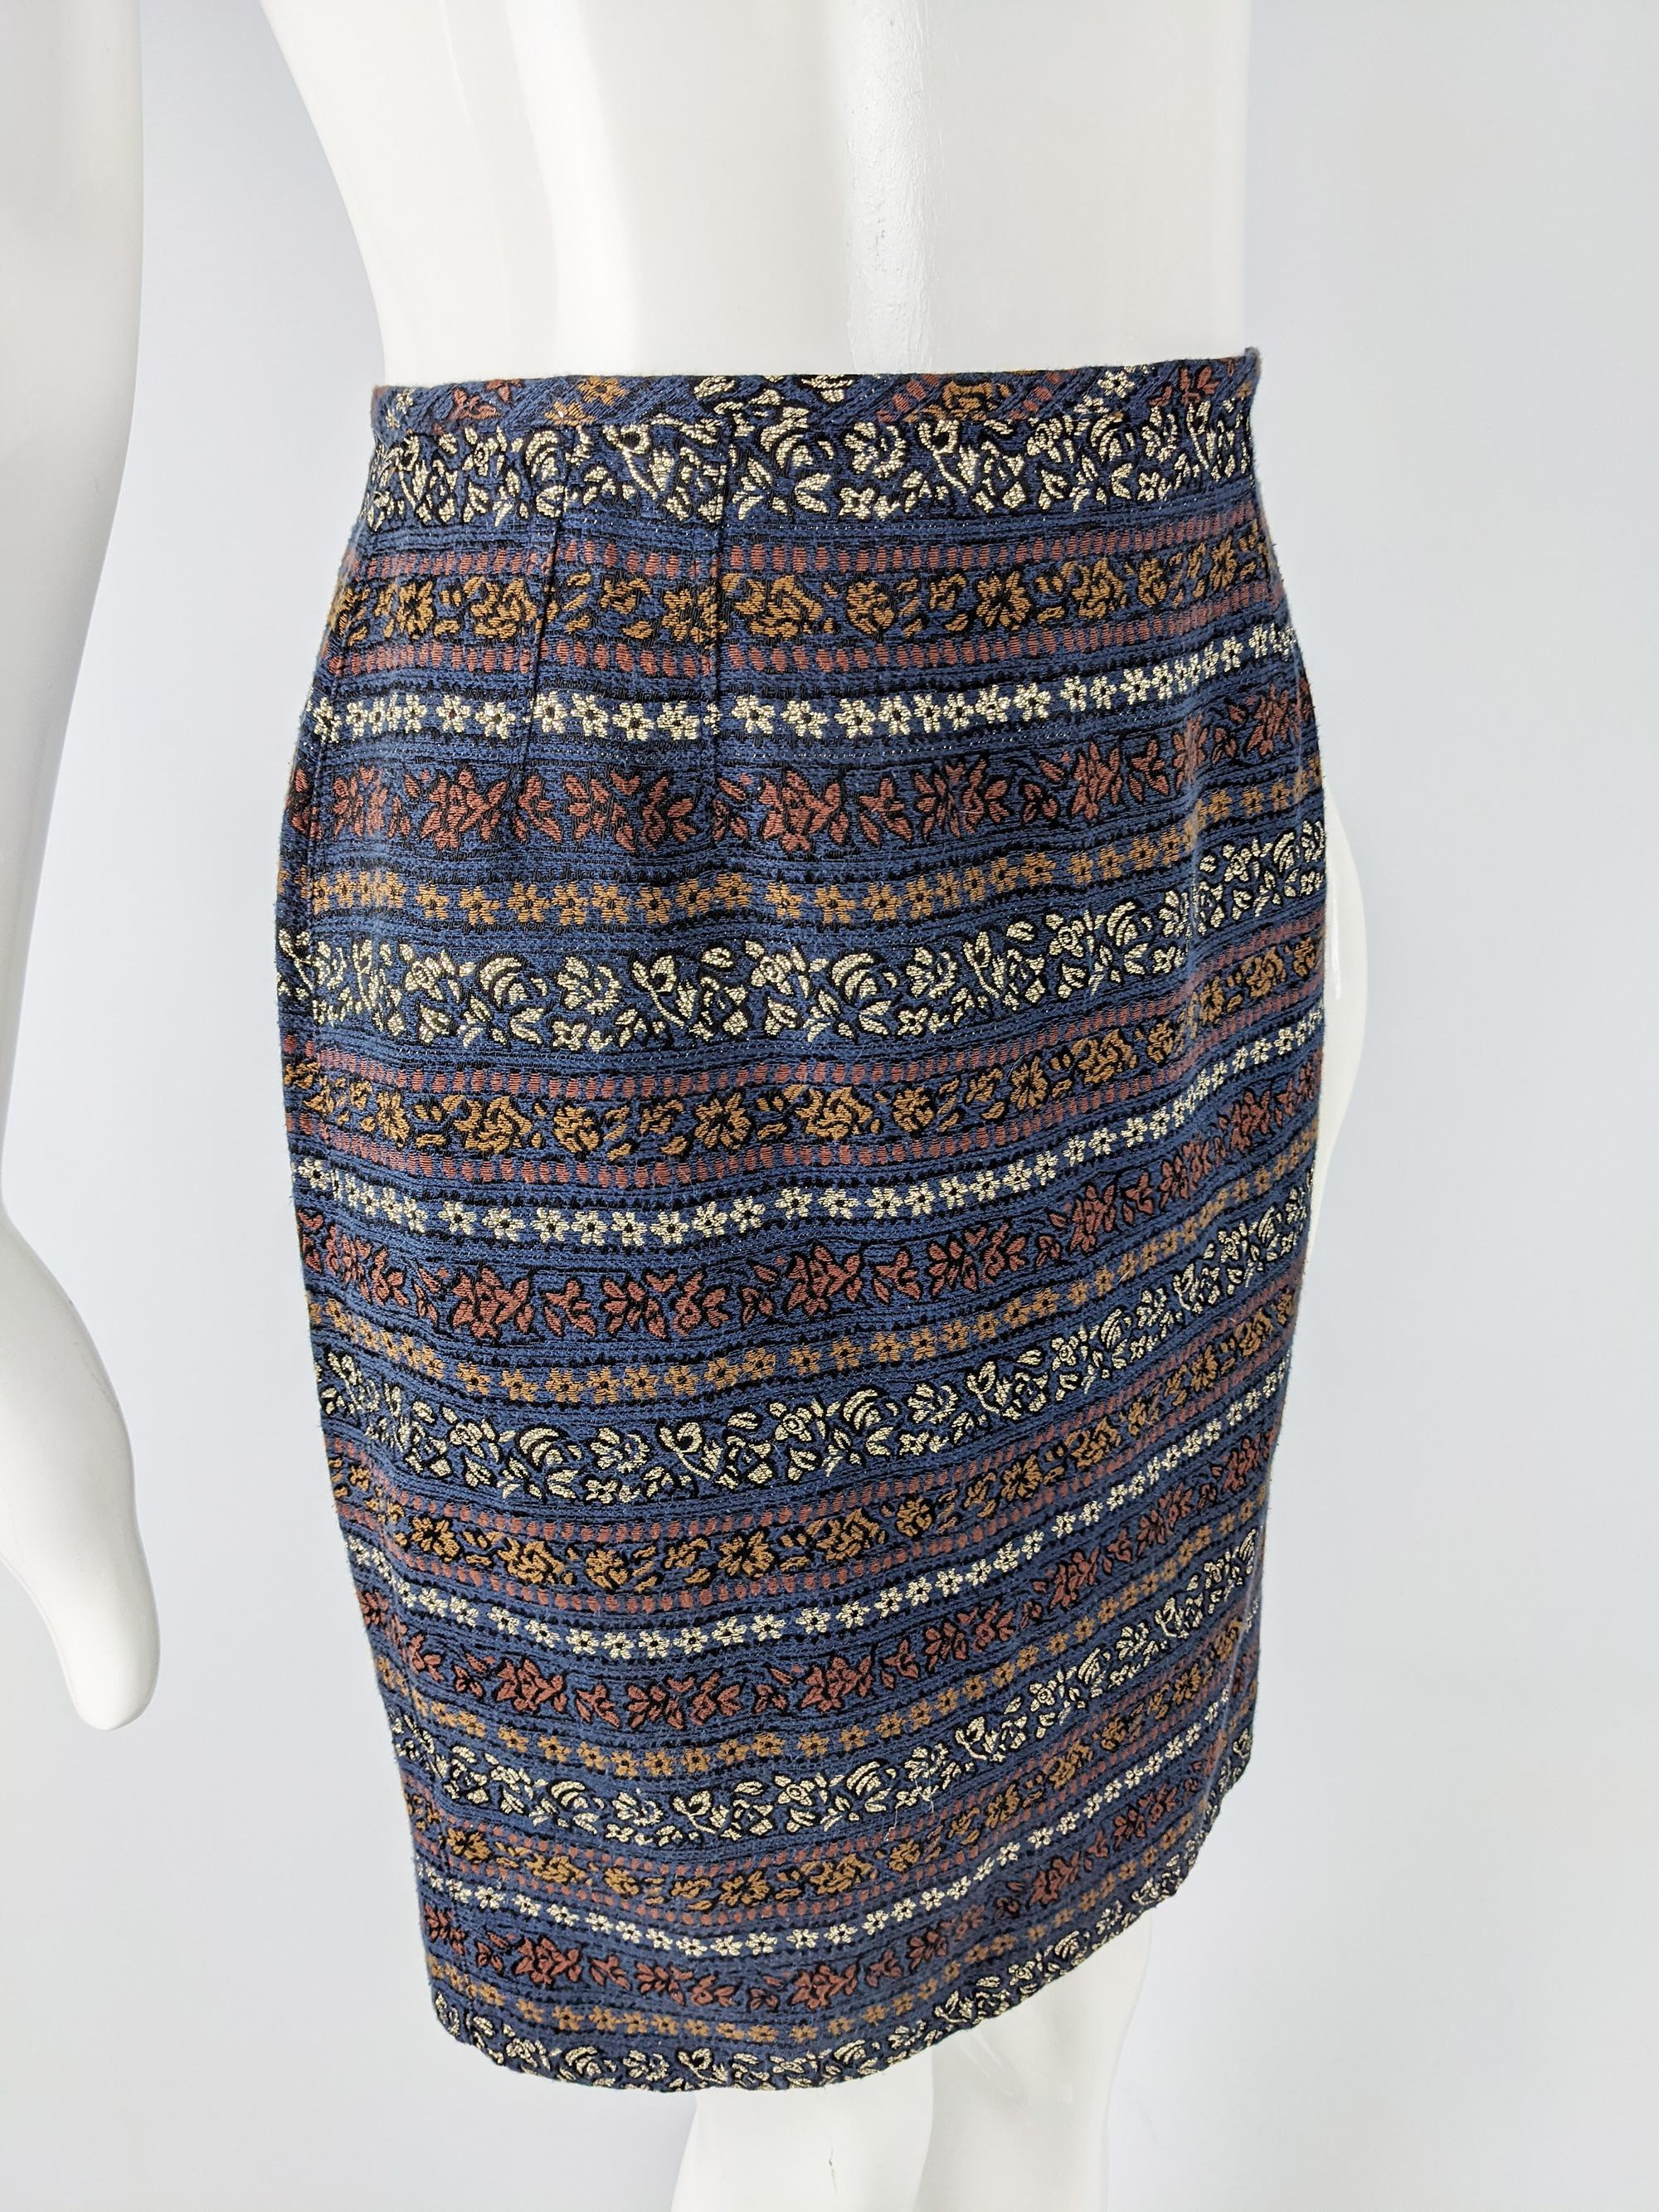 Jean Paul Gaultier Vintage Blue & Gold Brocade Party Day to Evening Skirt, 1980s 2